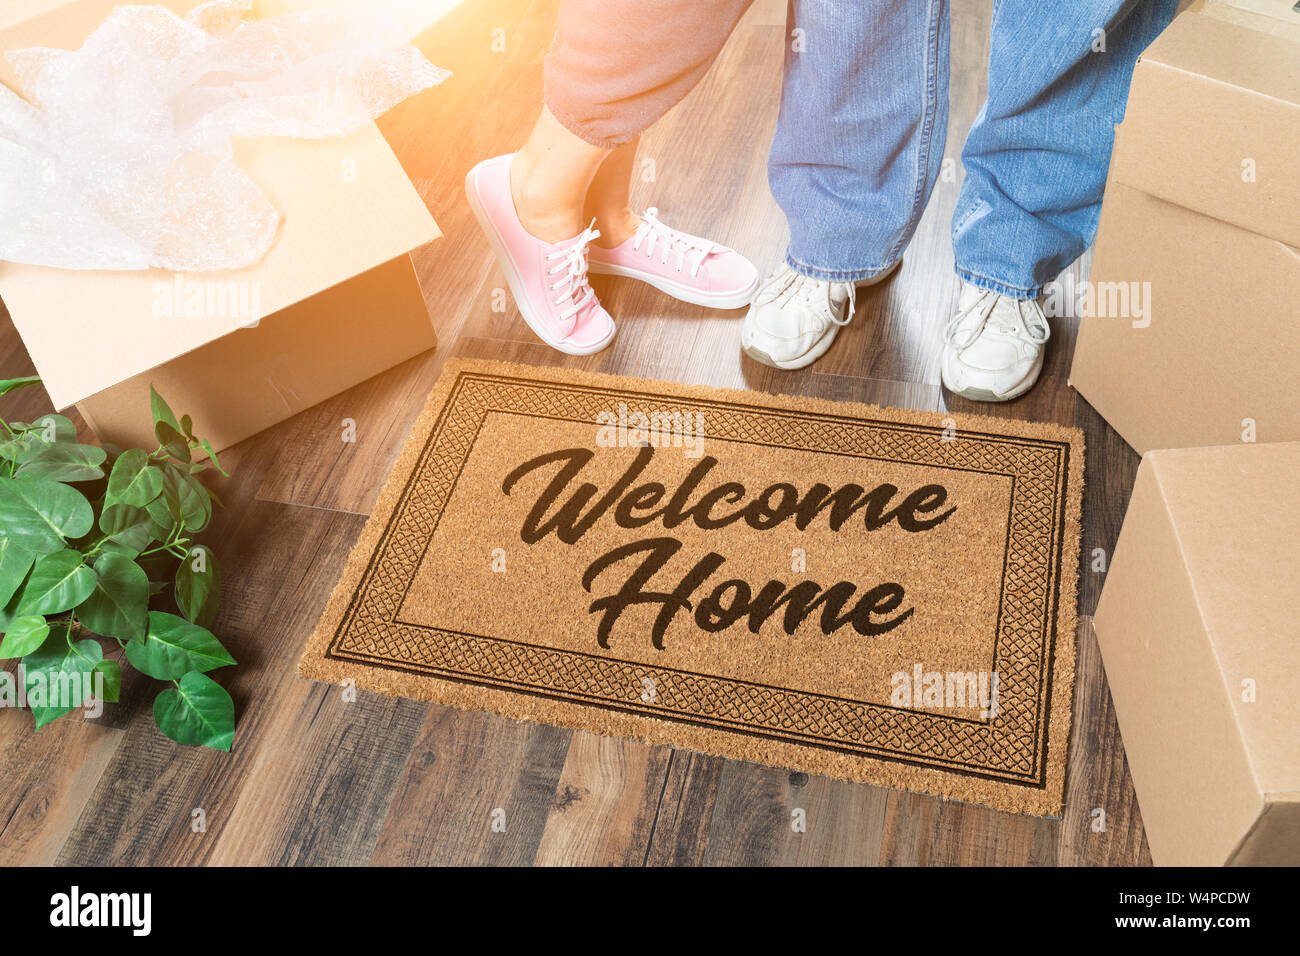 Man and Woman Unpacking Near Welcome Home Welcome Mat, Moving Boxes and Plant. Stock Photo